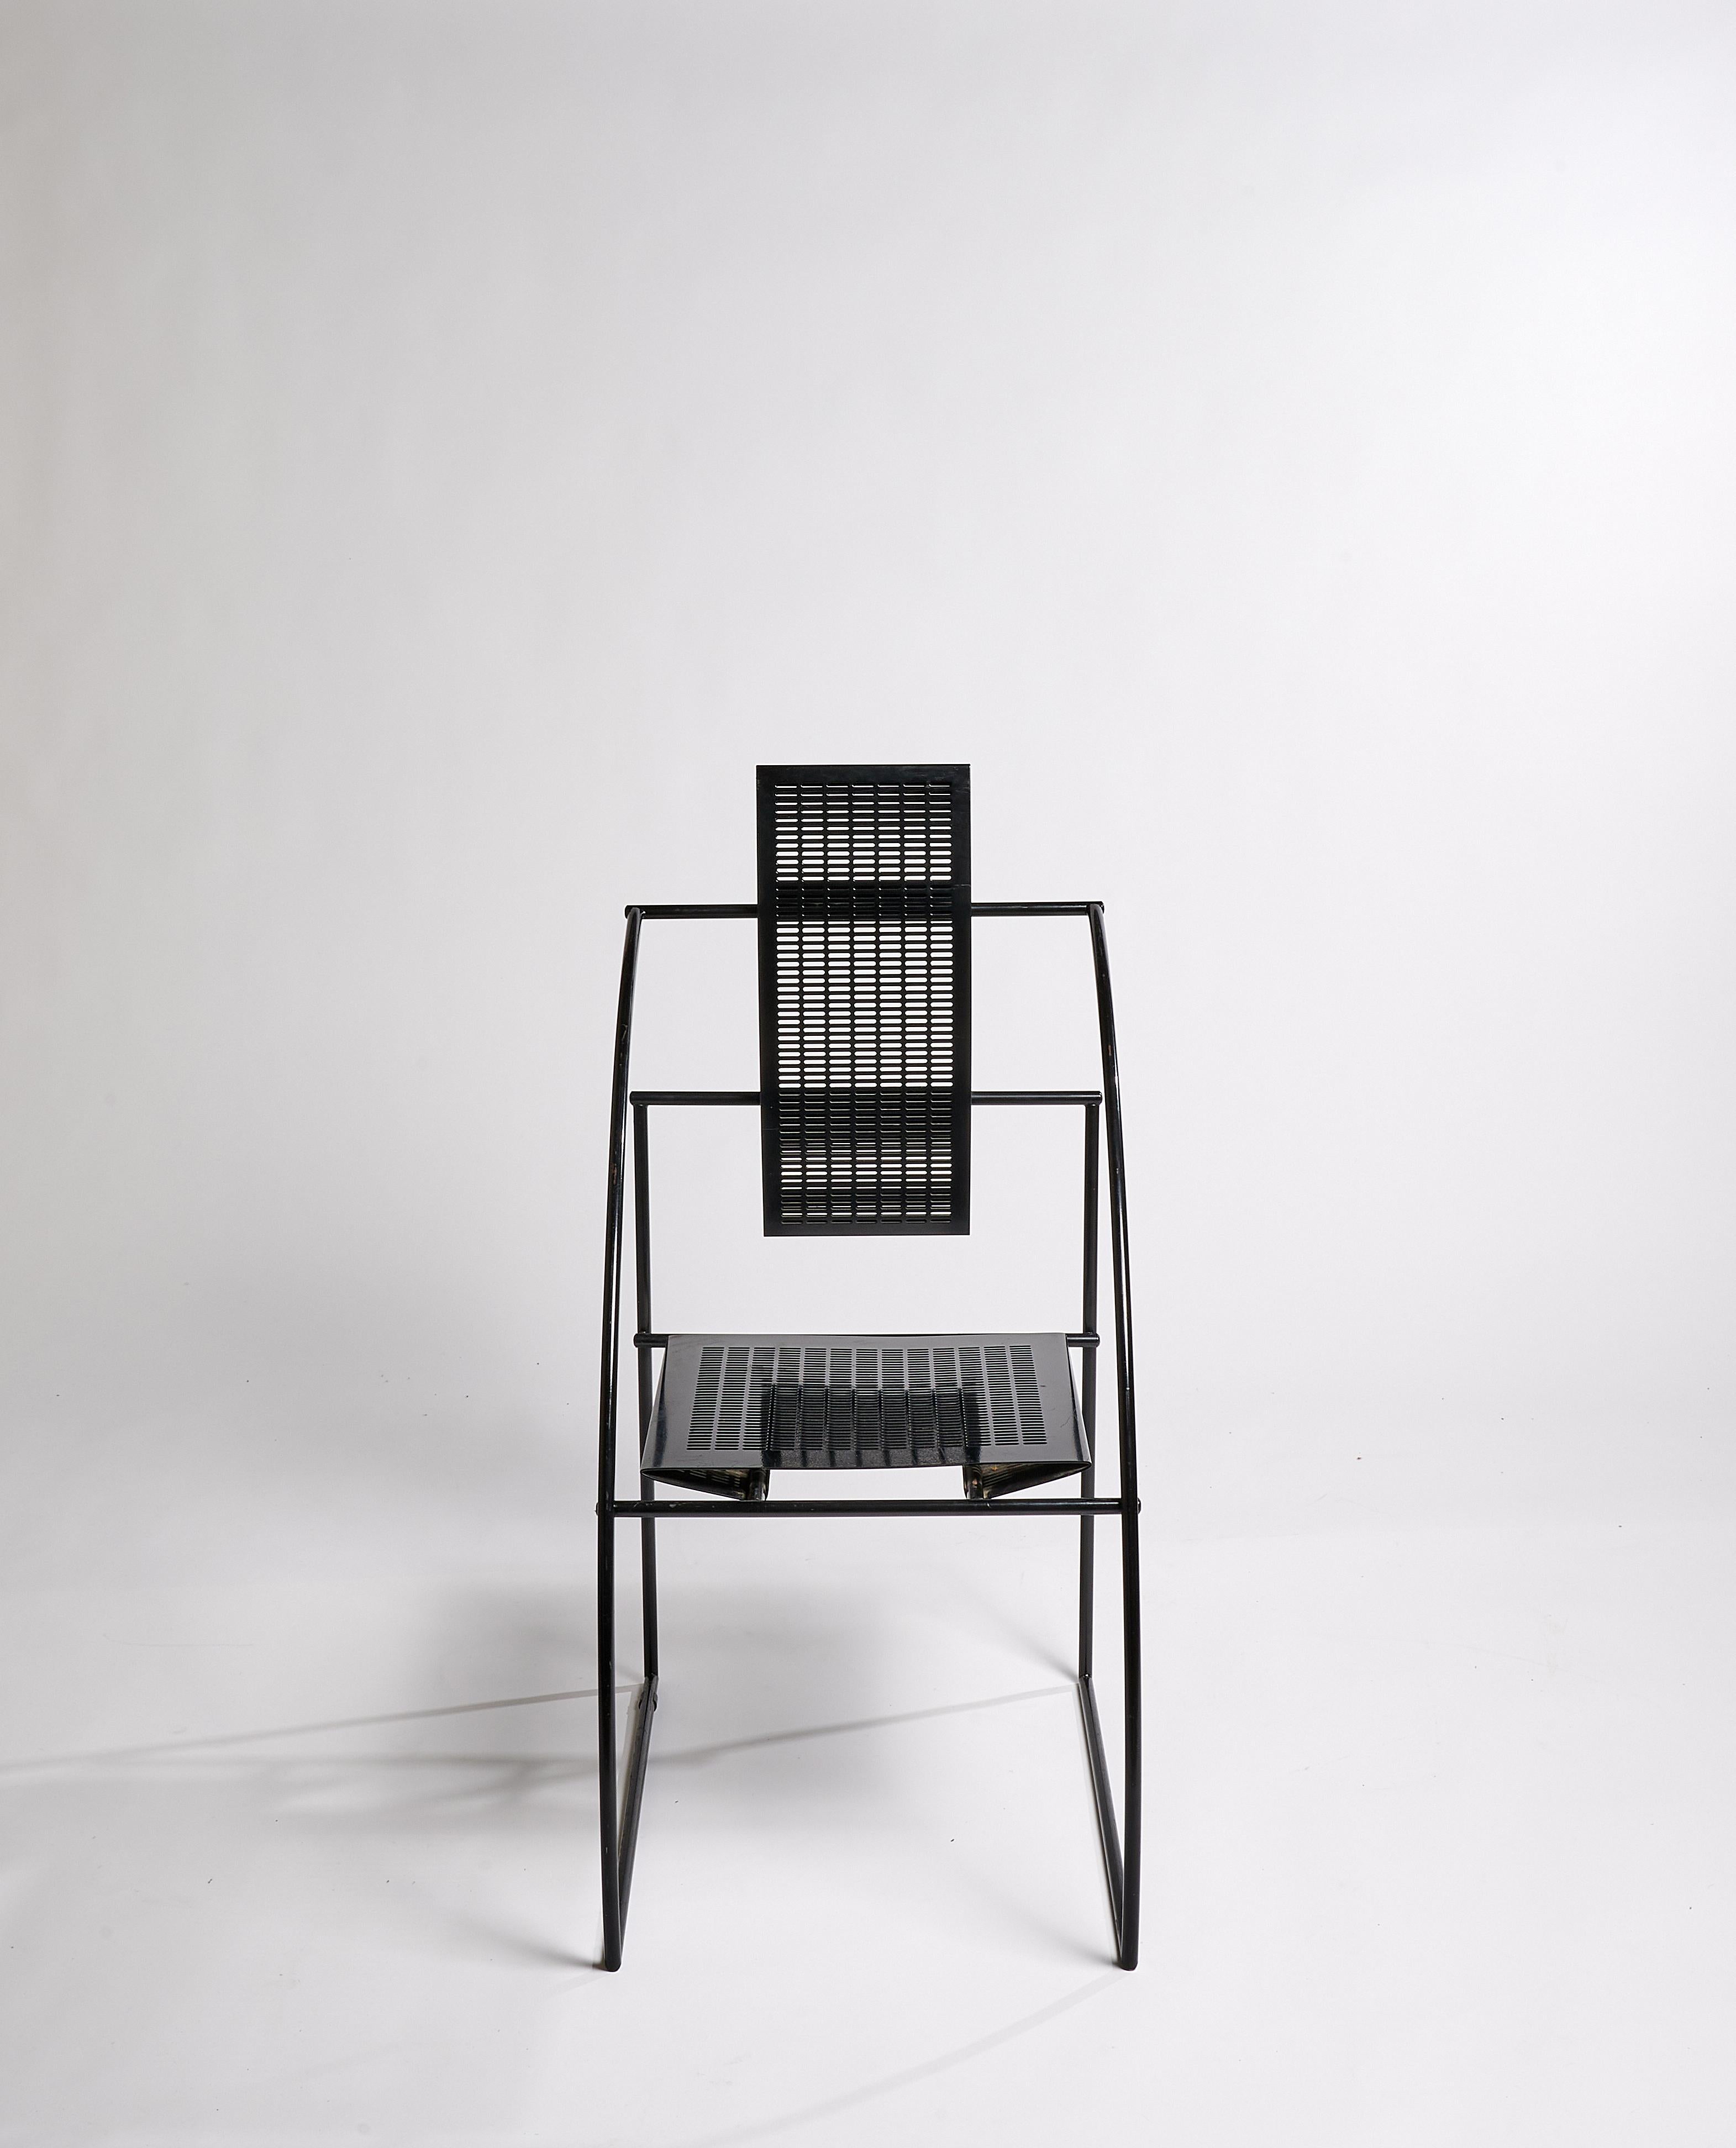 Quinta chair (model 605) by Mario Botta, for Alias

Black lacquered steel structure, seat and back in black perforated sheet steel